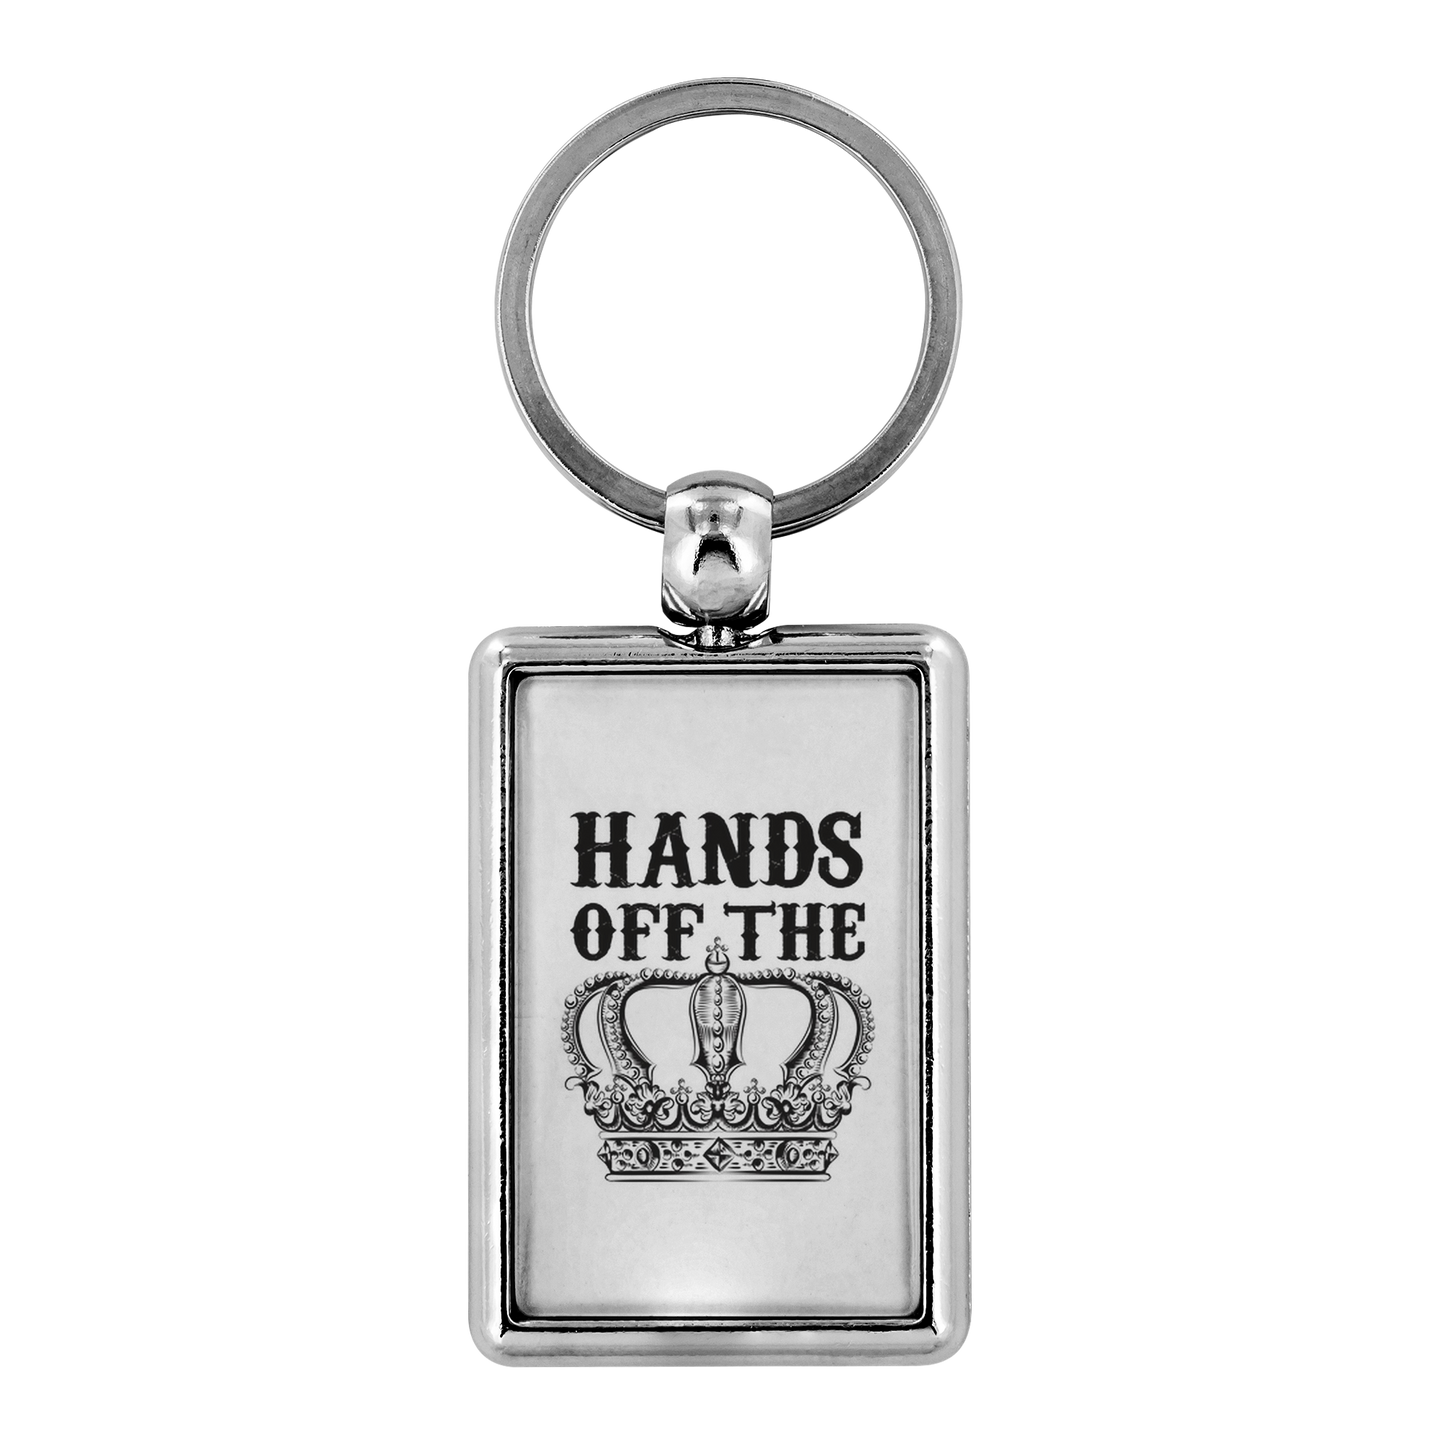 HANDS OFF THE CROWN KEYCHAIN